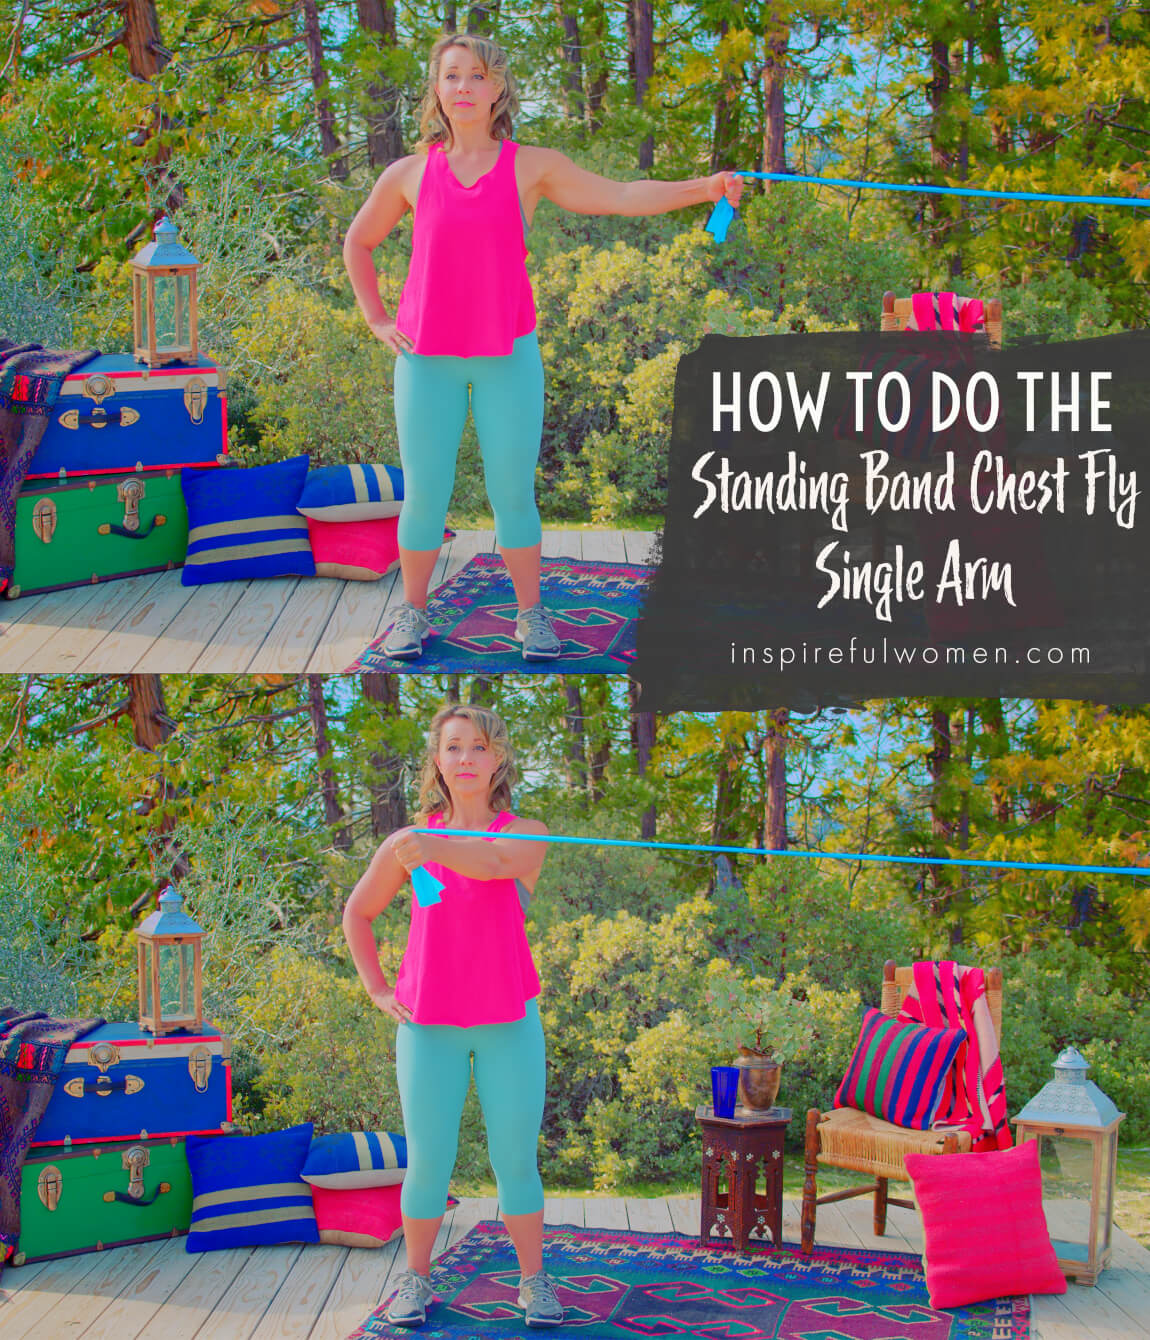 how-to-single-arm-resistance-band-chest-fly-standing-strength-exercise-proper-form